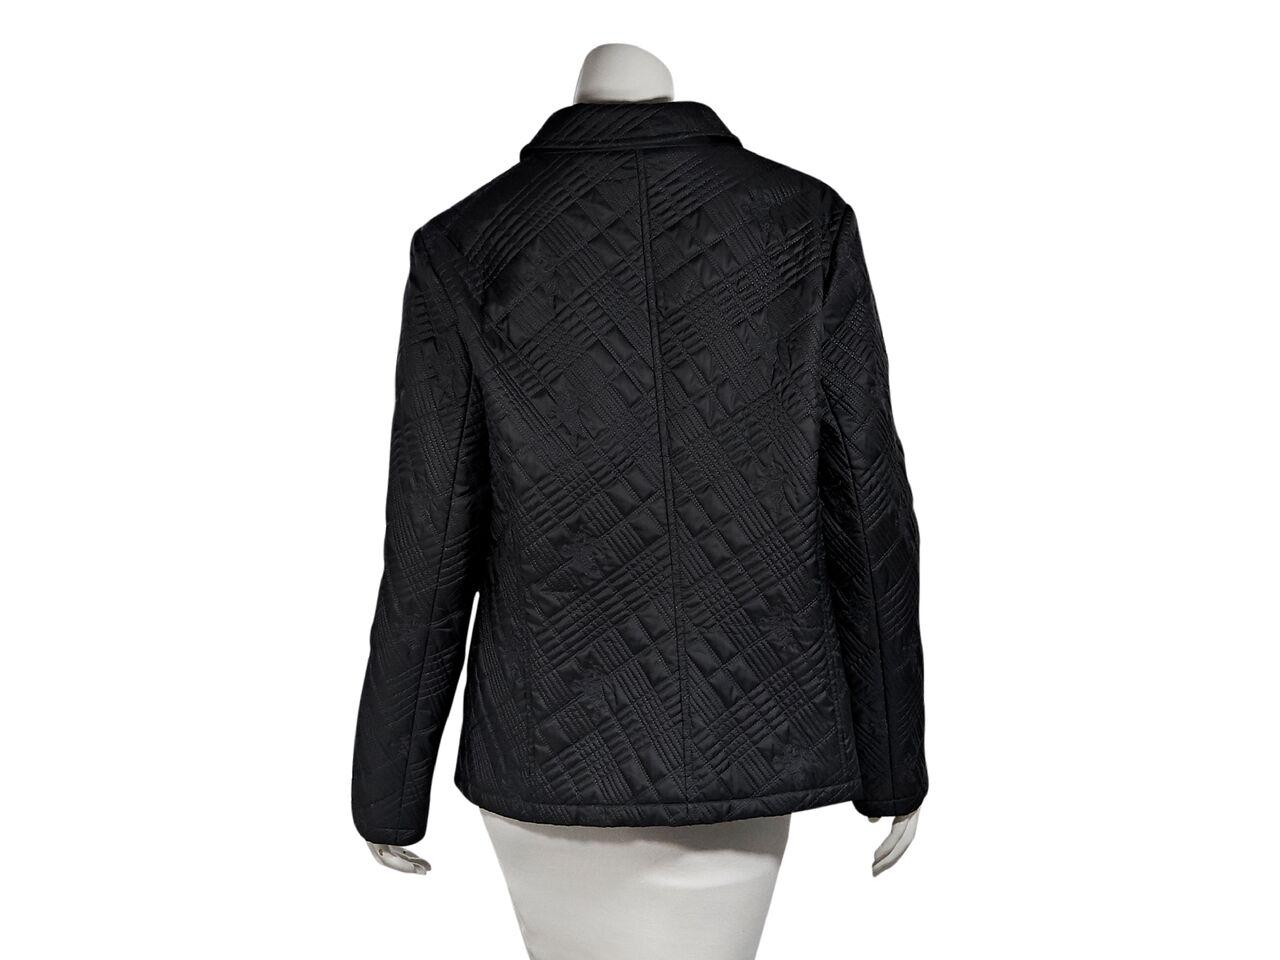 Product details:  Dark grey lightweight quilted jacket by Burberry London.  Spread collar.  Long sleeves.  Zip-front closure.  Waist on-seam slide pockets.  41